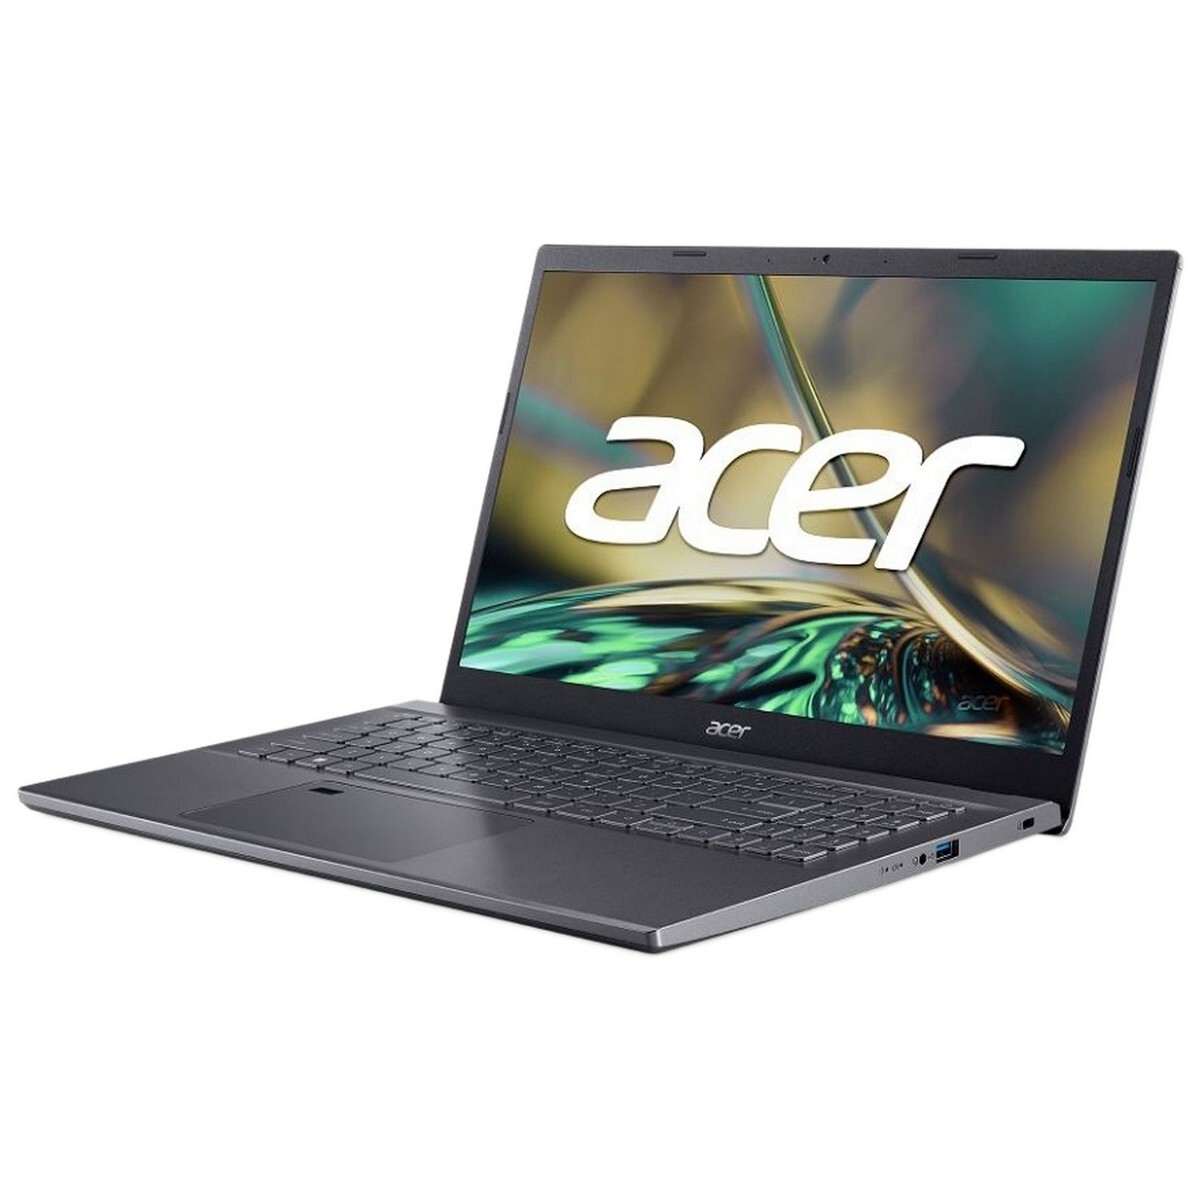 Acer Aspire 5 gaming Core i5 12th Gen 1240P - (8 GB/512 GB SSD/Windows 11 Home/4 GB Graphics/NVIDIA GeForce RTX RTX 2050) A515-57G Gaming Laptop